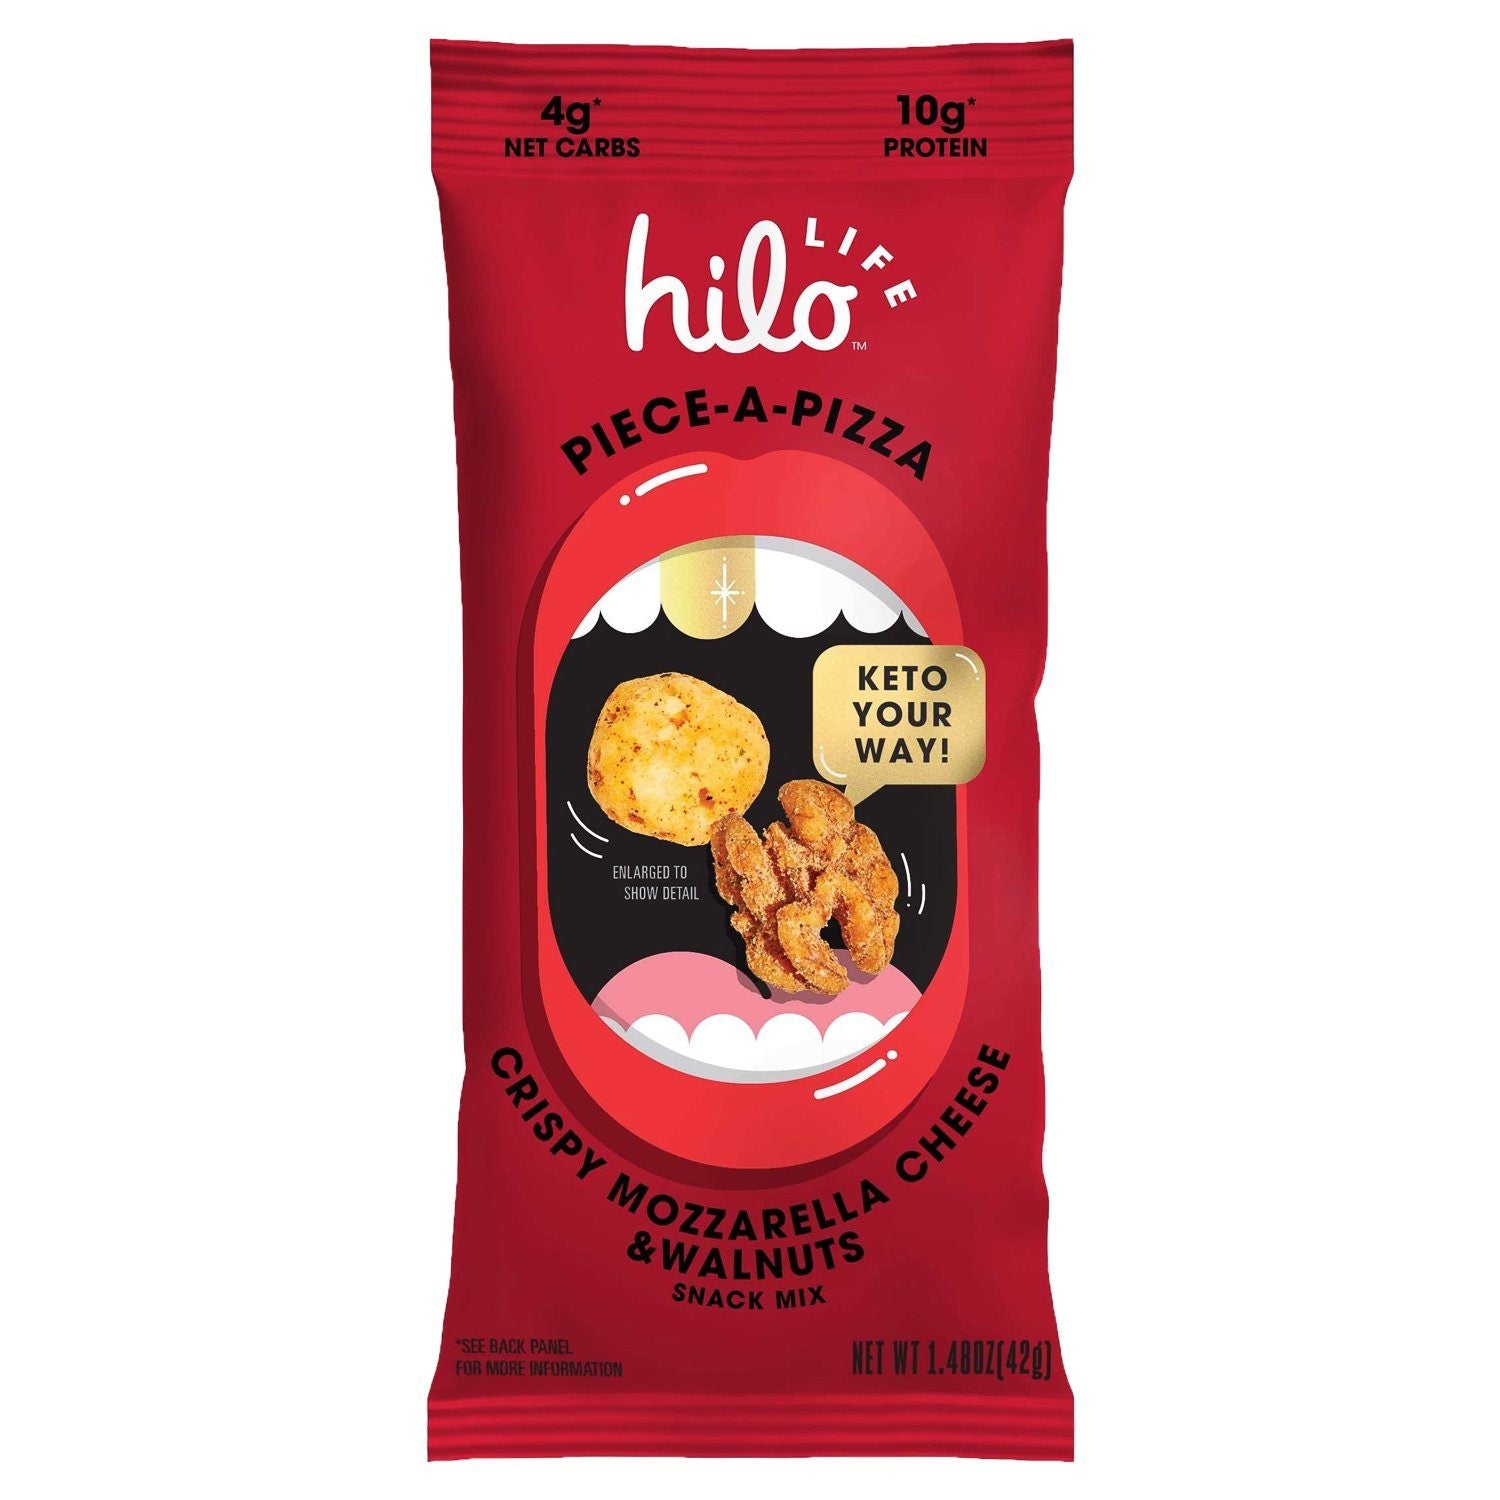 hilo Life Cheese & Nut Snack Mix hilo Life Piece-A-Pizza 1.48 Ounce 